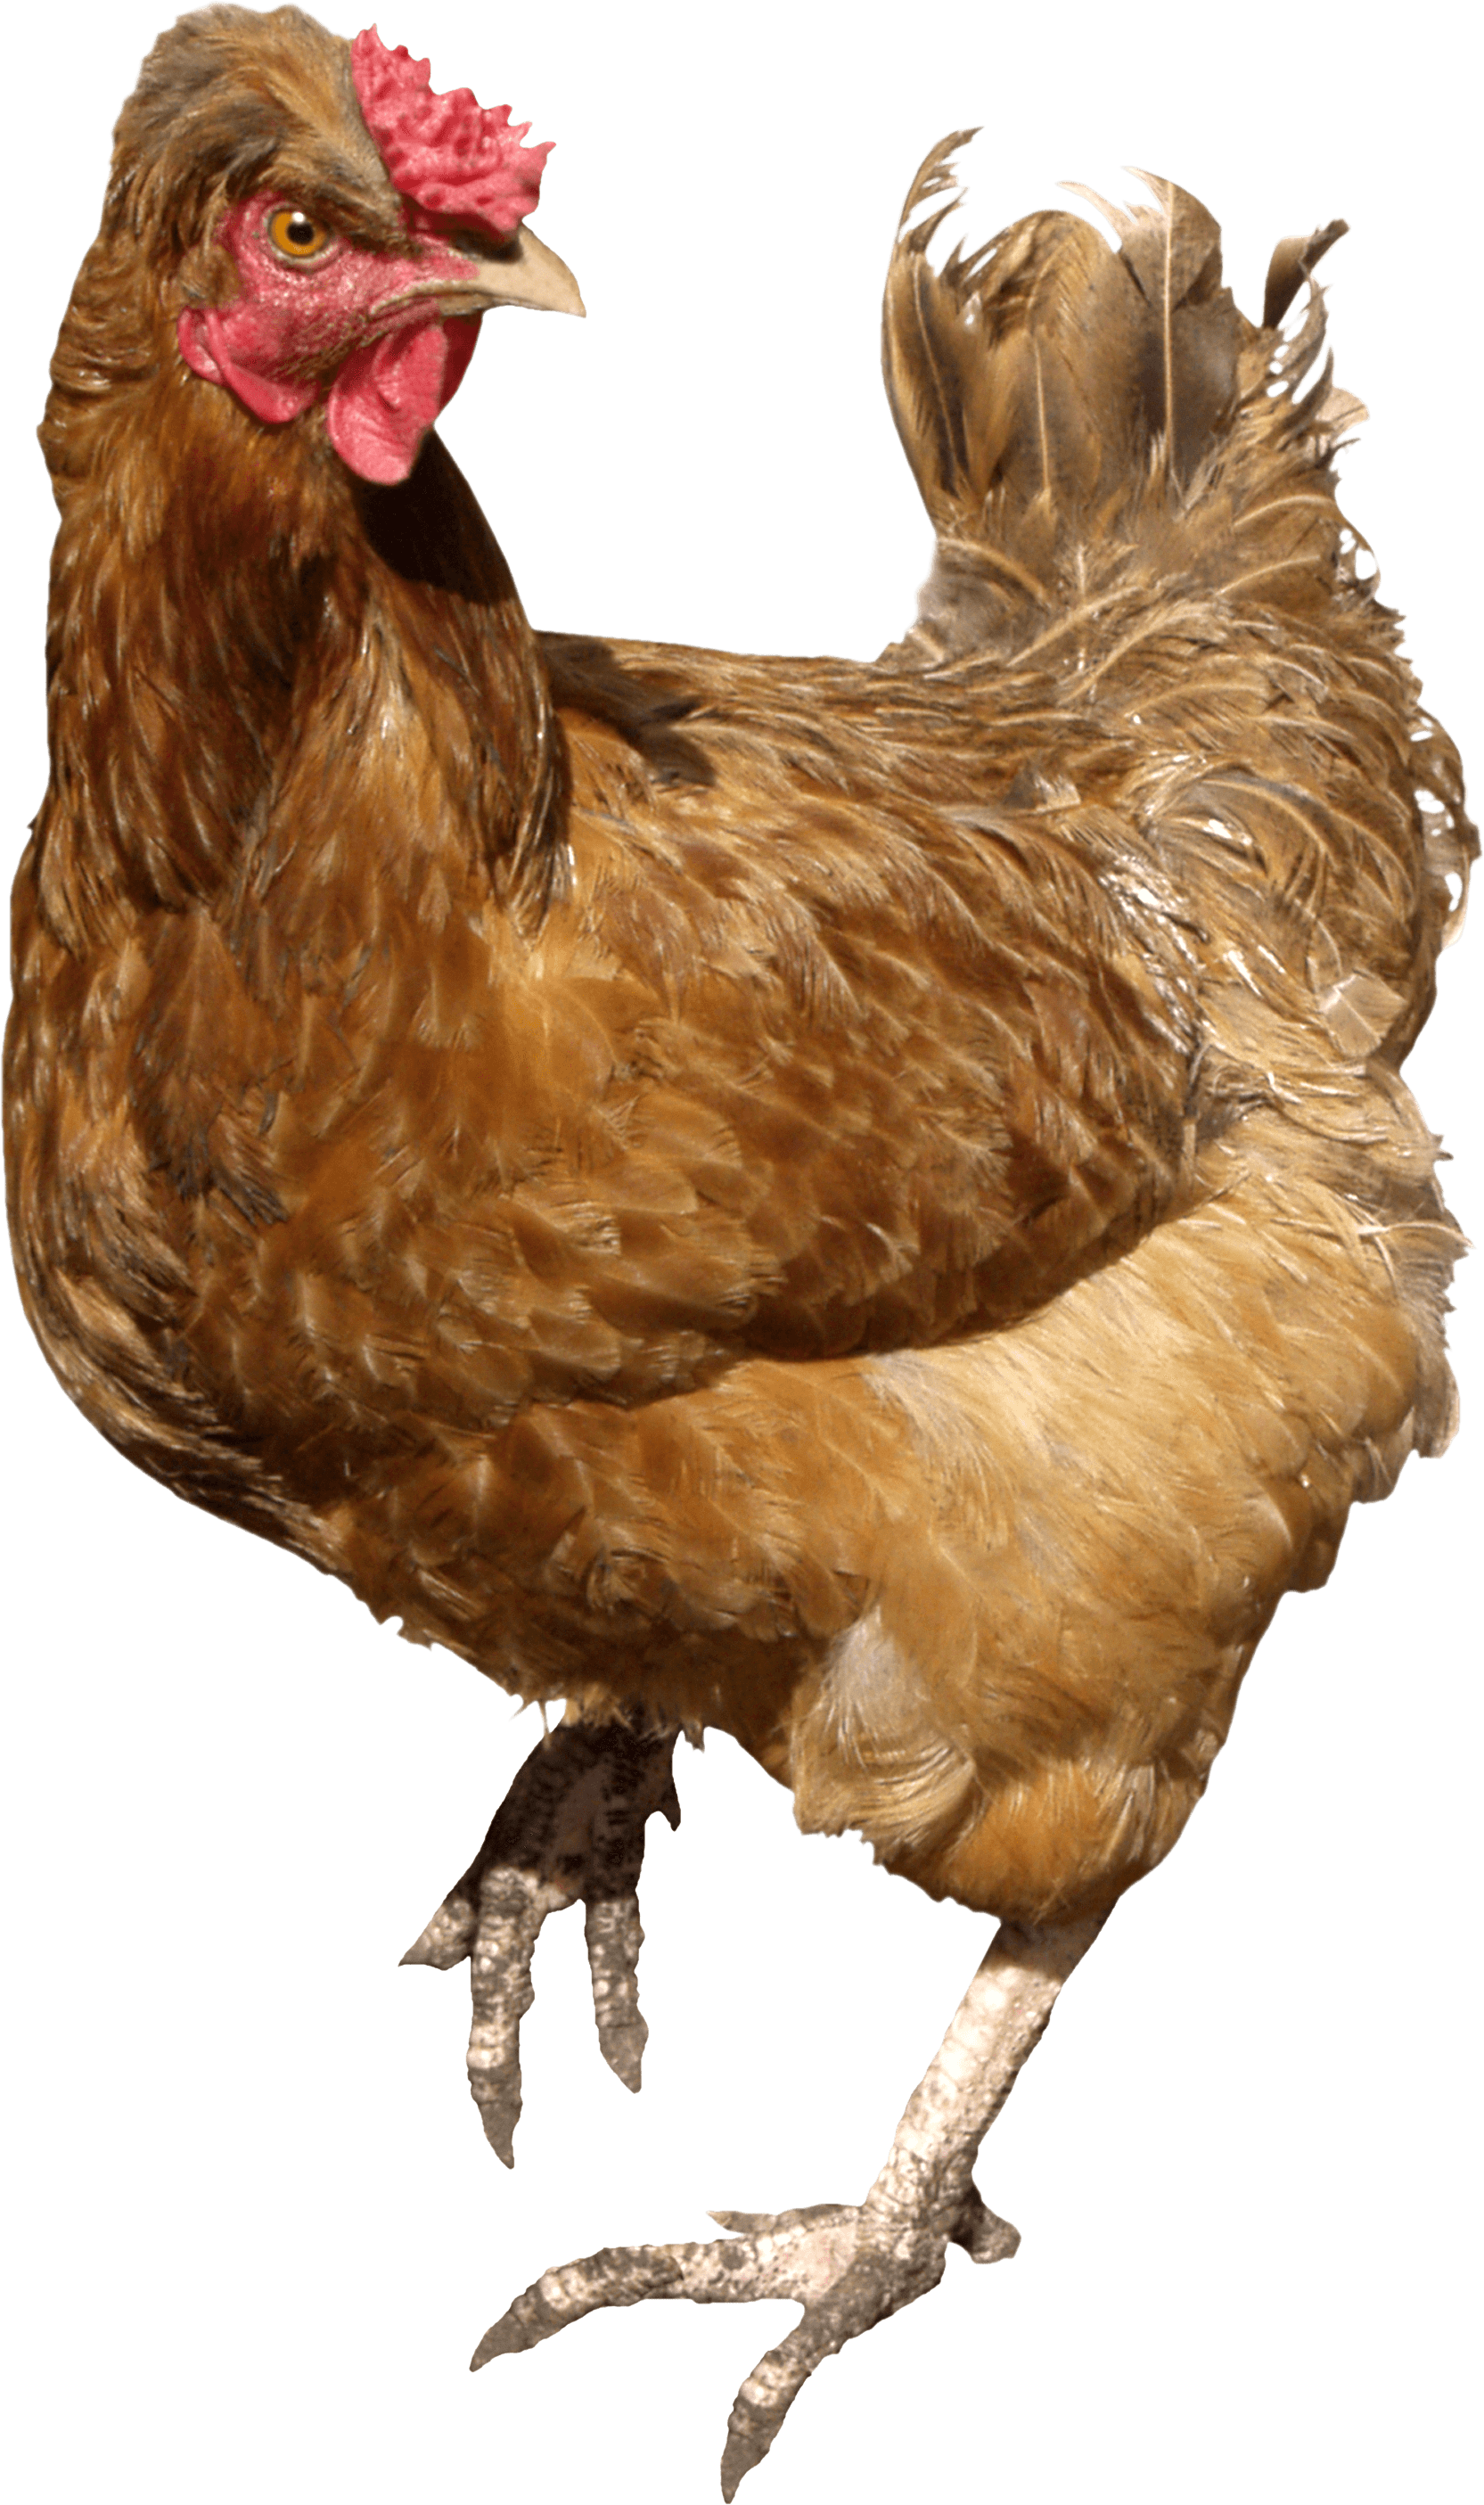 Chicken Brown Walking - Of Chickens, Transparent background PNG HD thumbnail